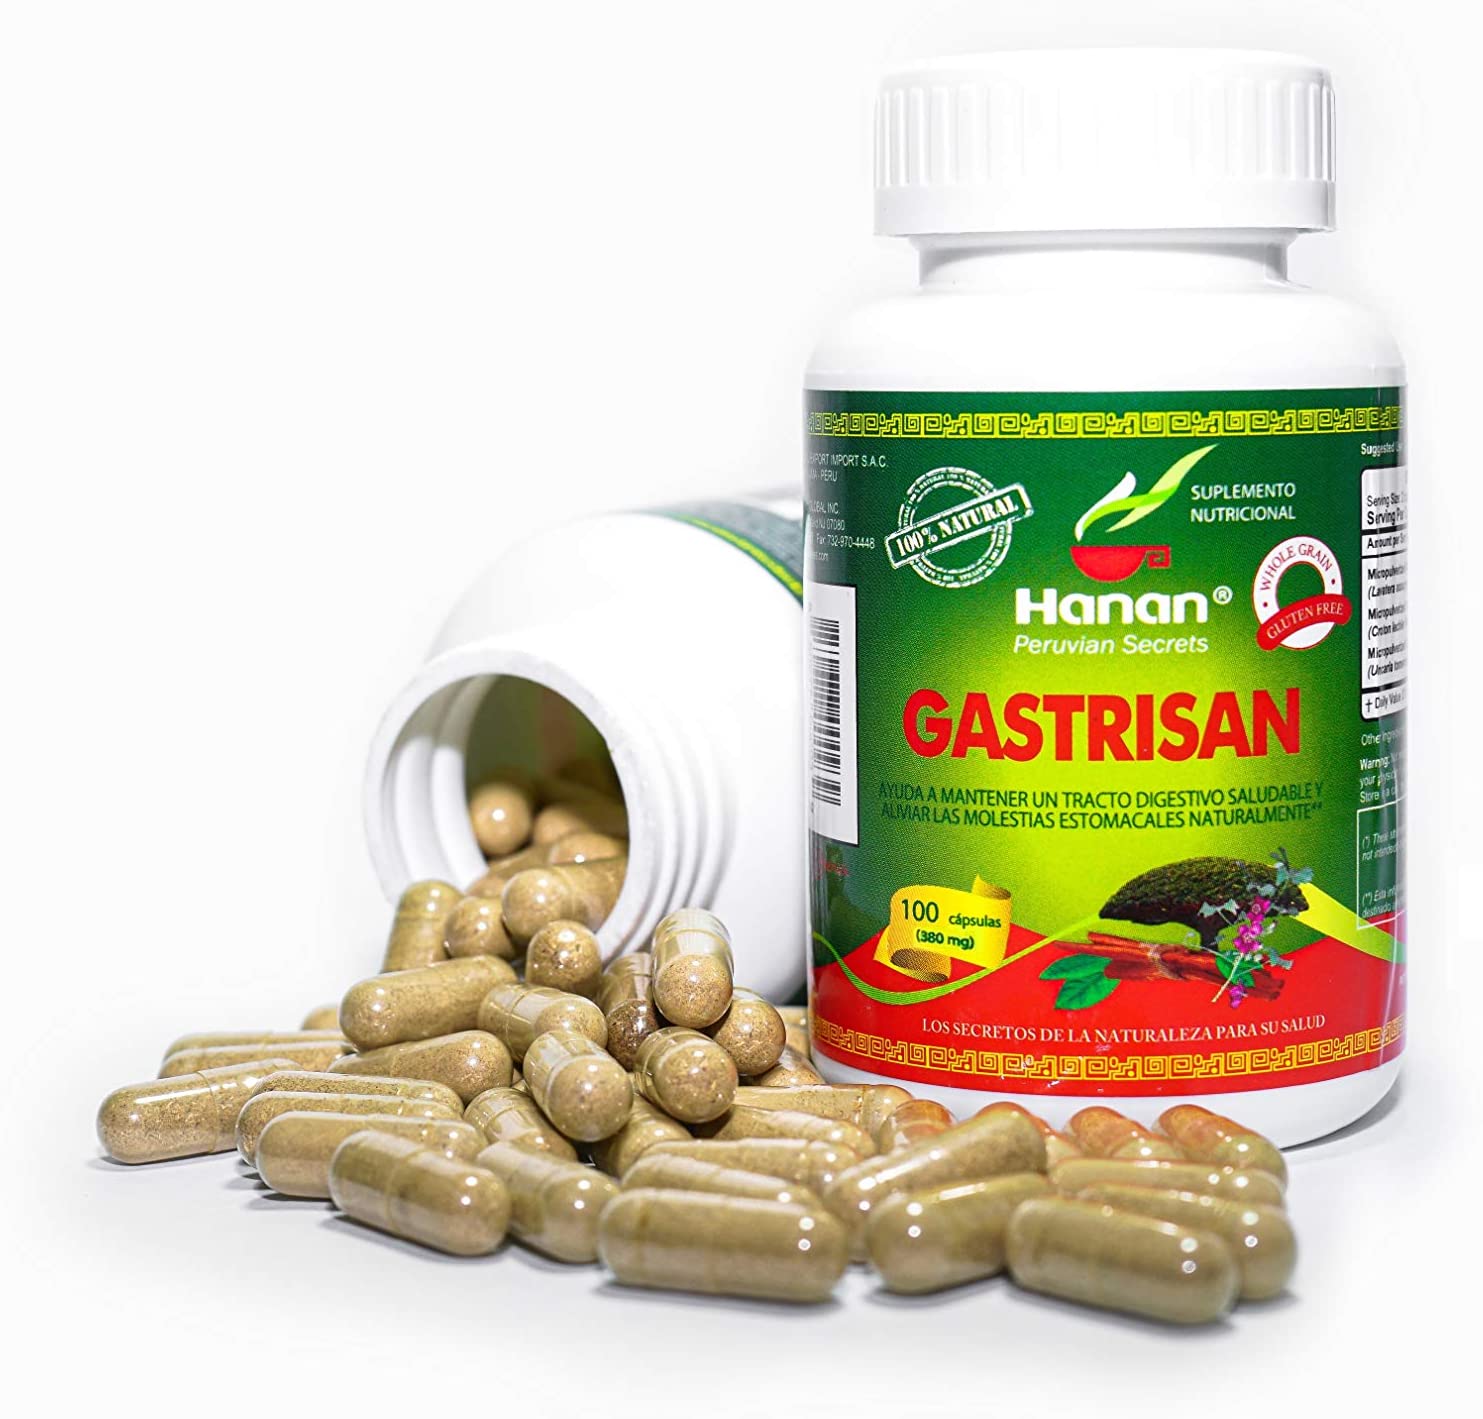 Gastrisan Gastric Cleanser Blend | 100 Capsules | Naturally Aids in Supporting Healthy Digestive Tract